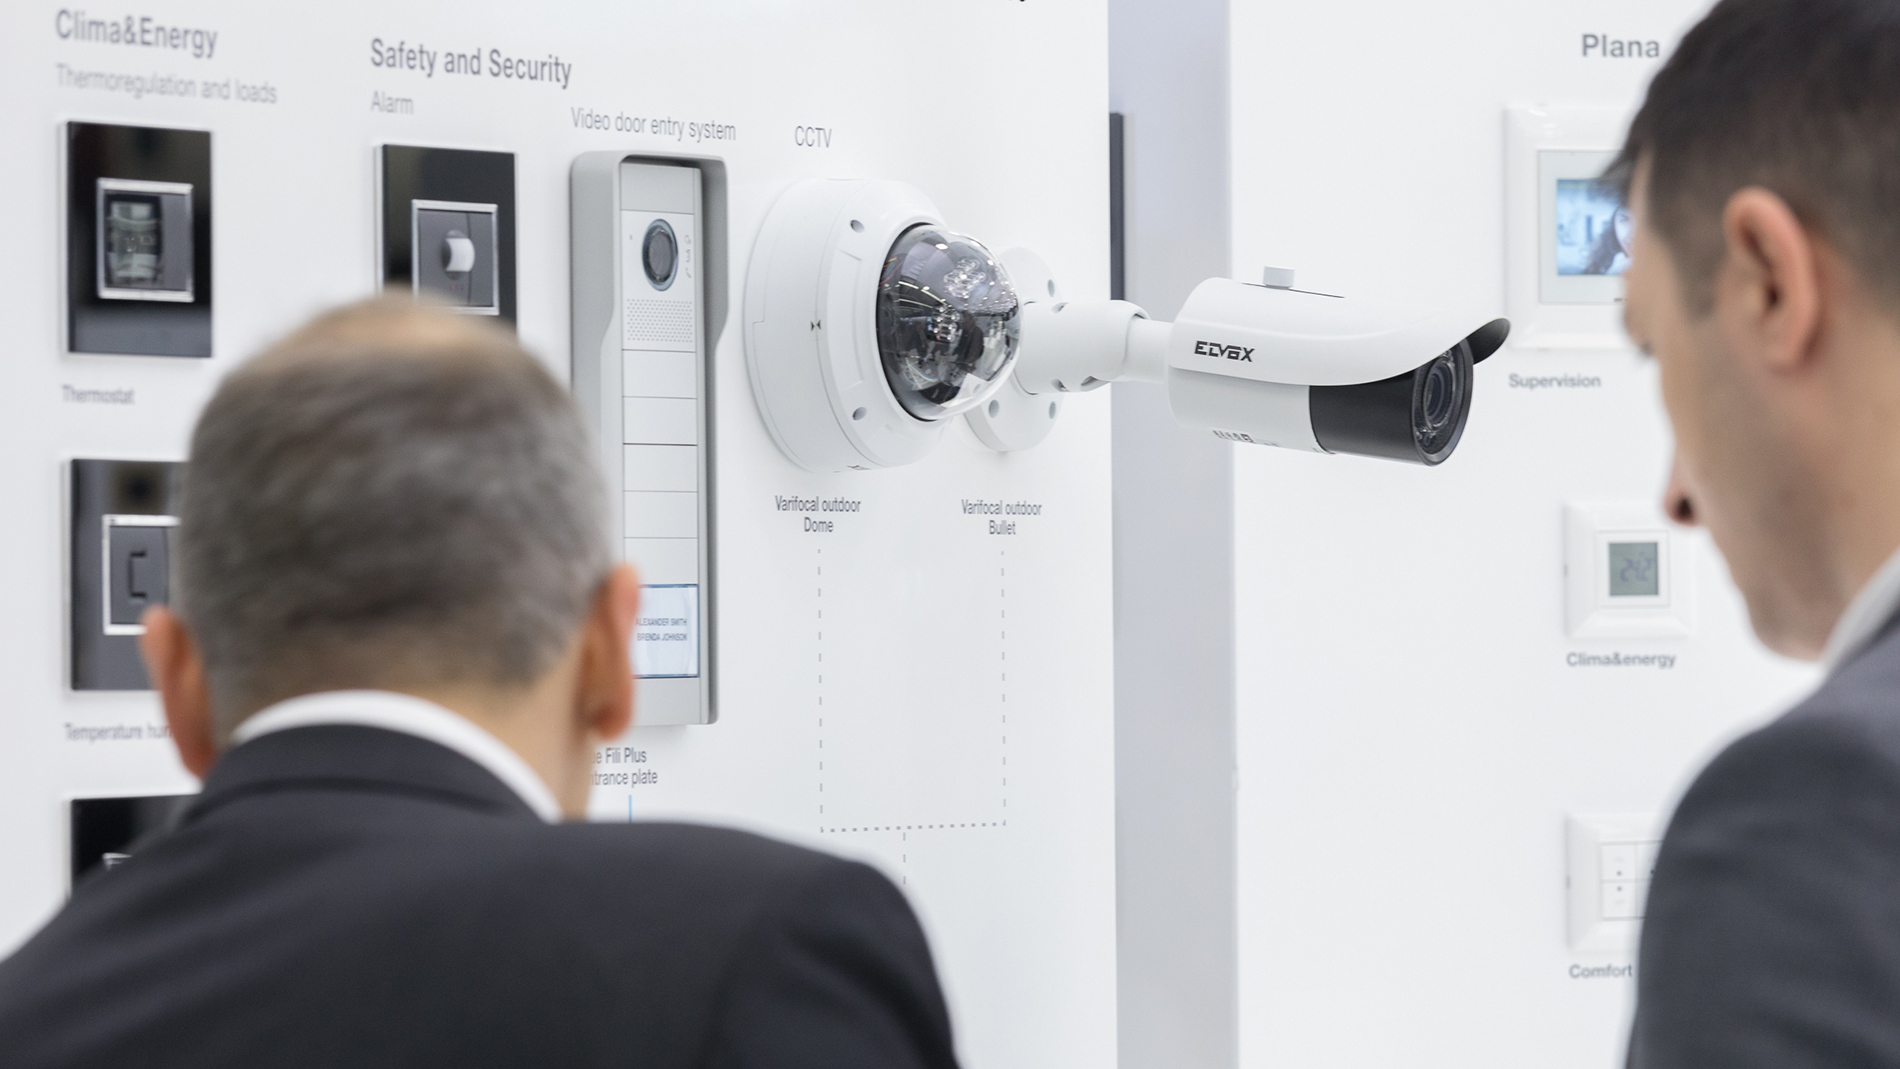 Whether electronic locking systems, surveillance cameras or fire protection: connected security technology is an integral part of the technical building infrastructure. (Source: Messe Frankfurt / Jens Liebchen)